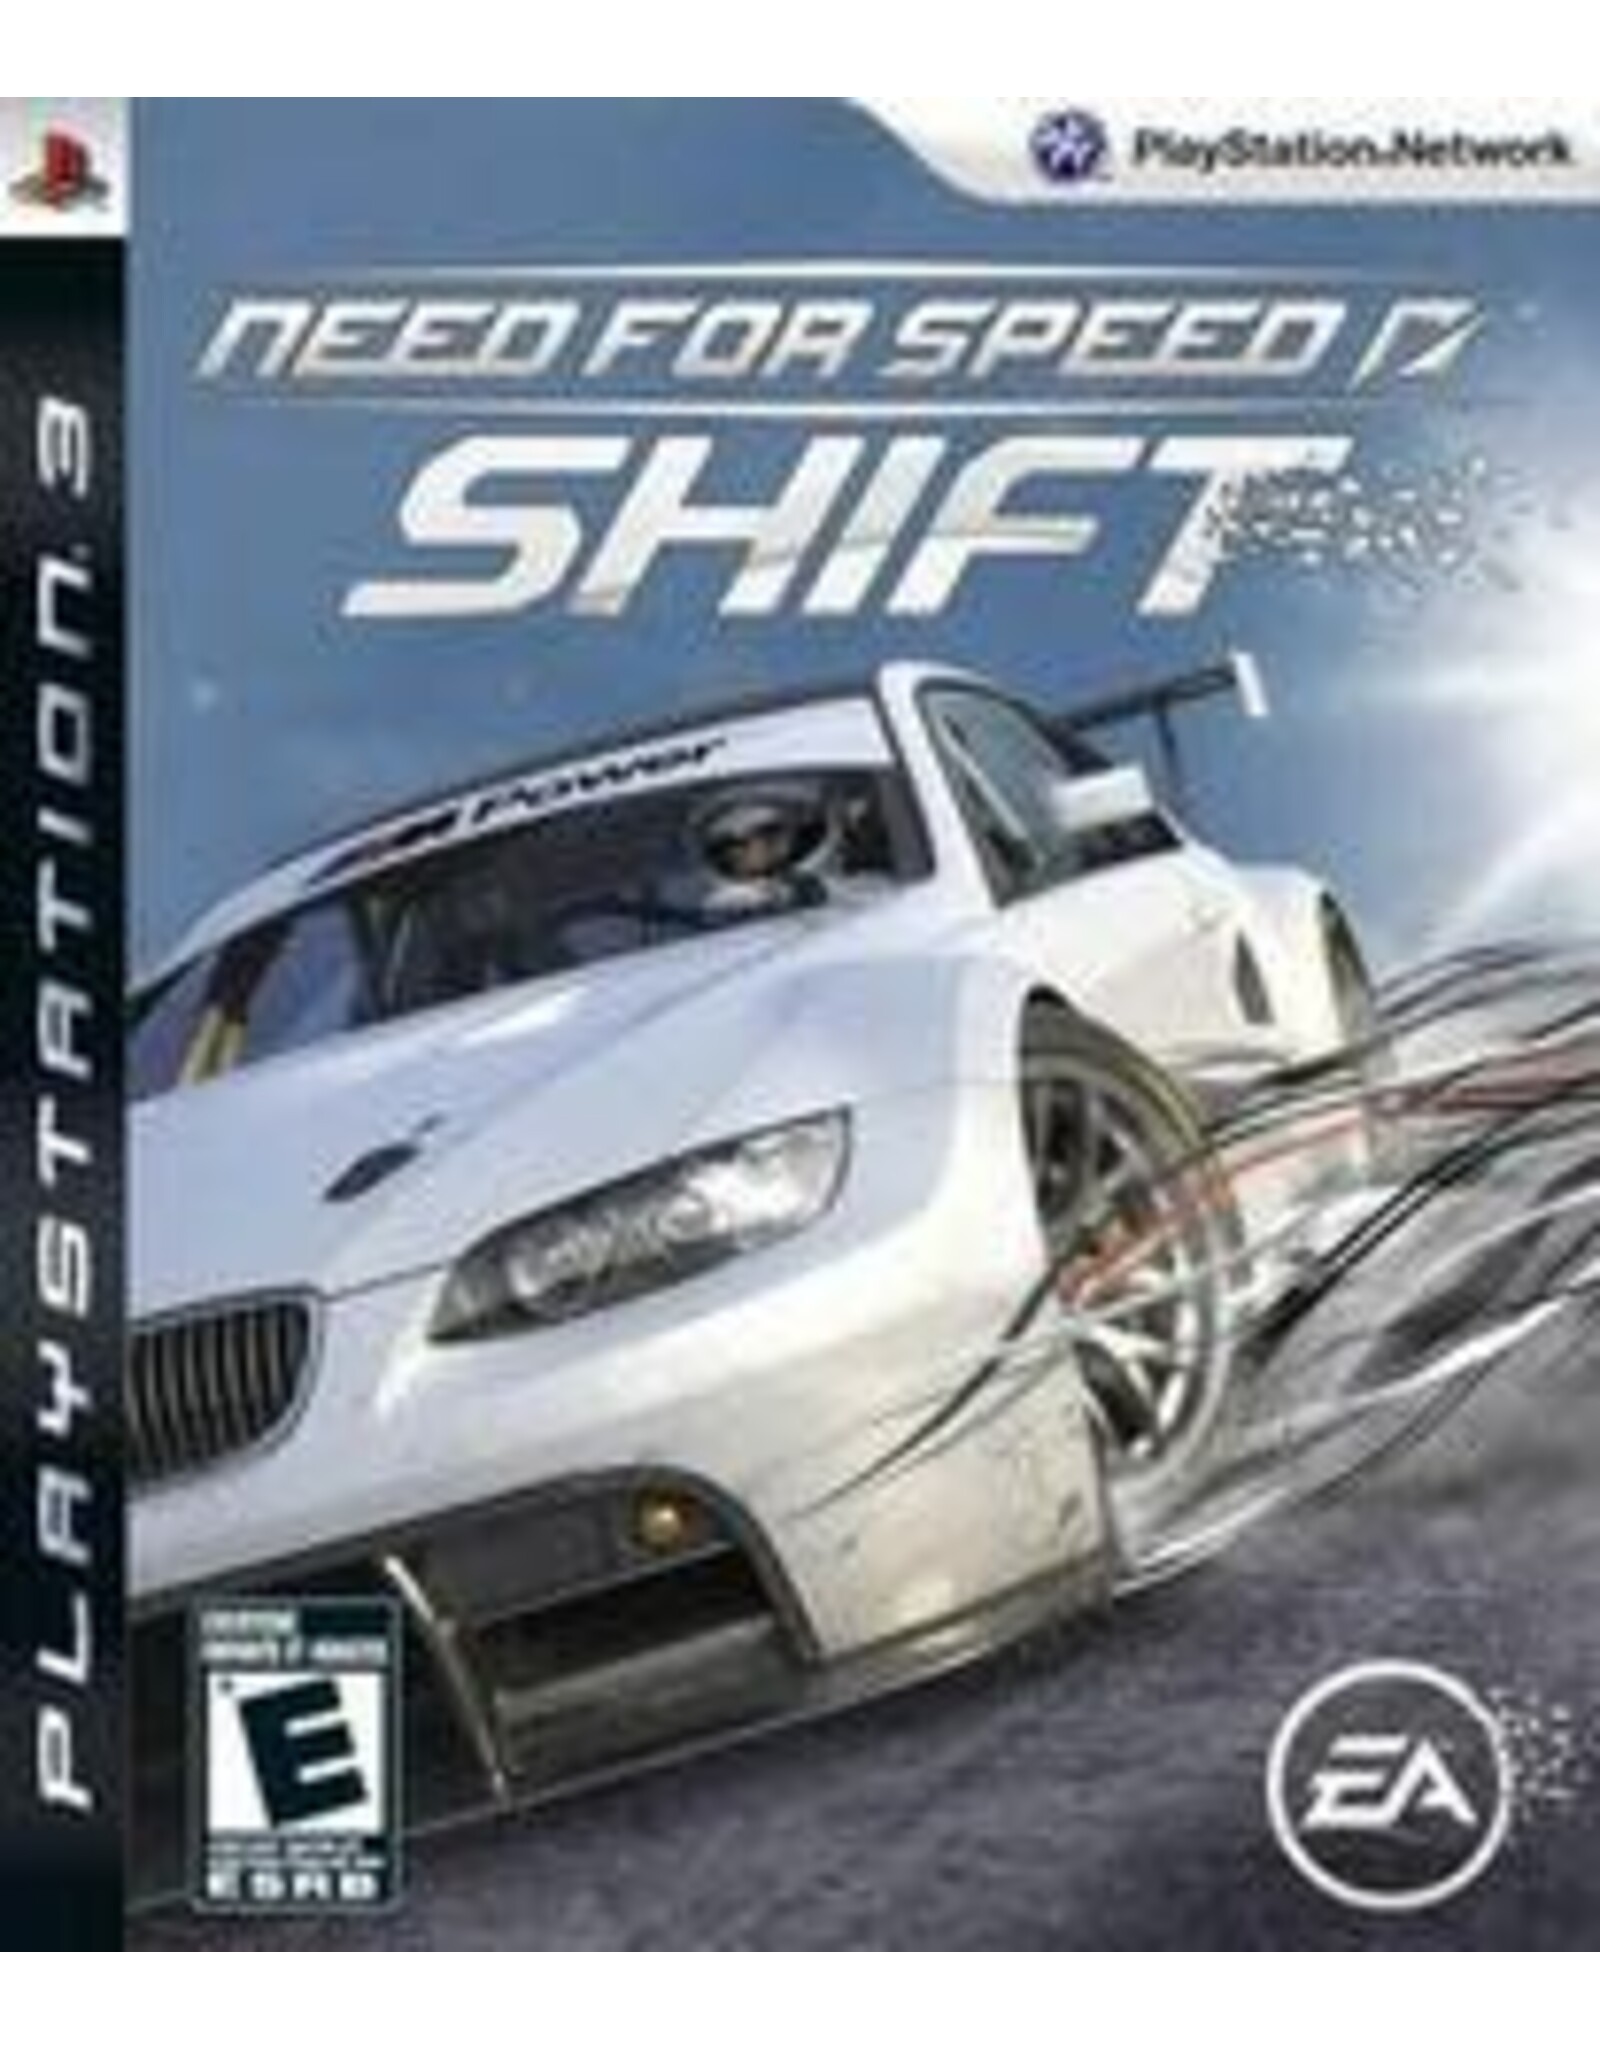 Playstation 3 Need for Speed Shift (Used)